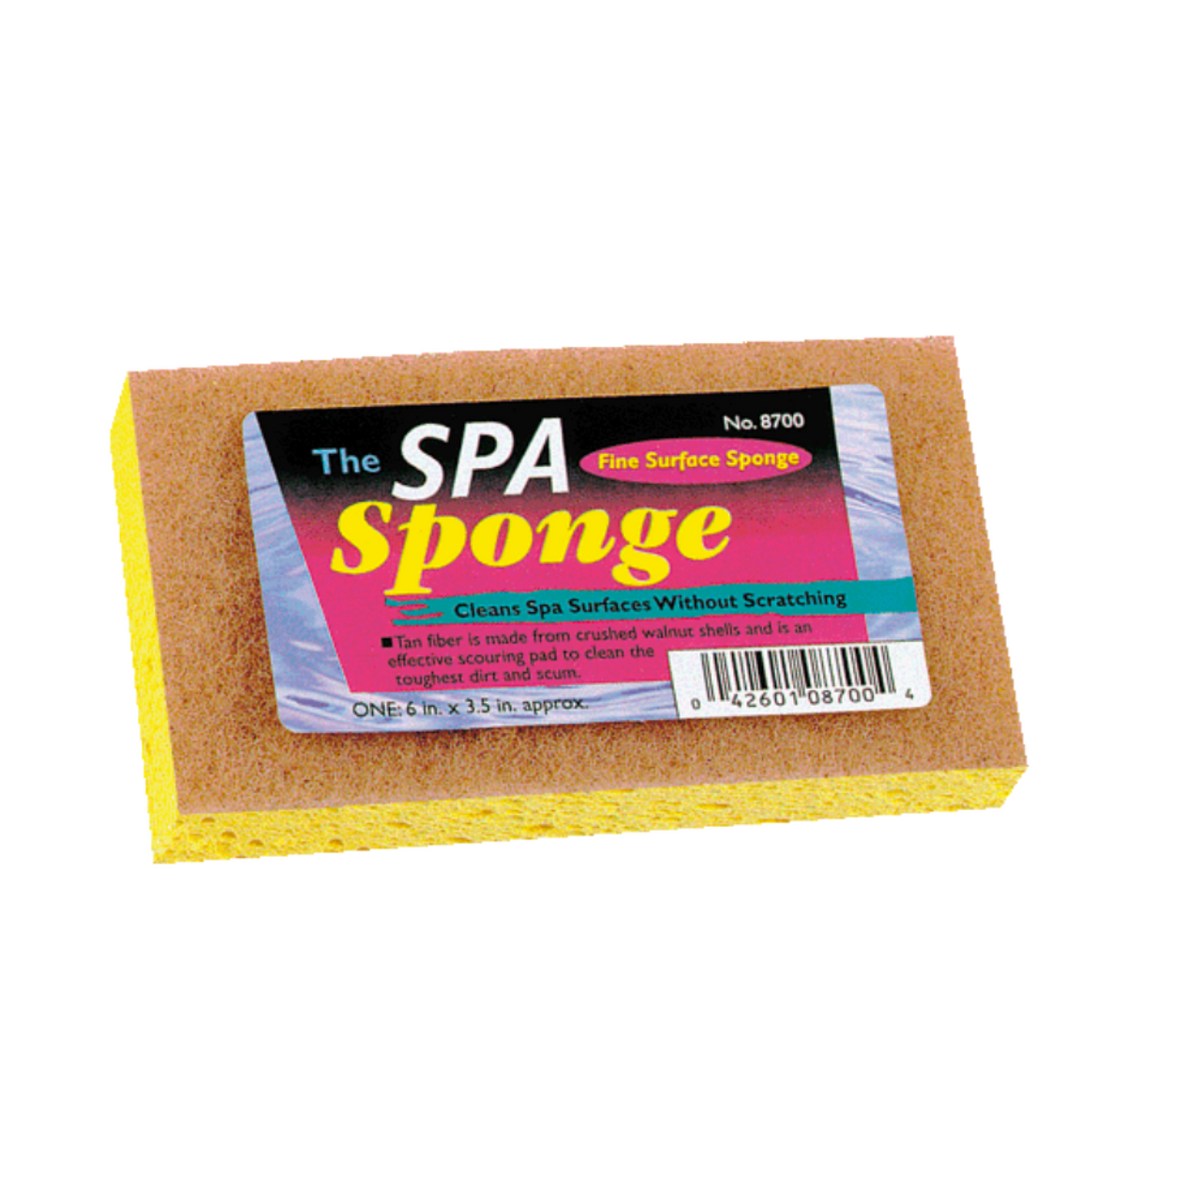 The Spa Sponge - Cleans Spa Surfaces Without Scratching